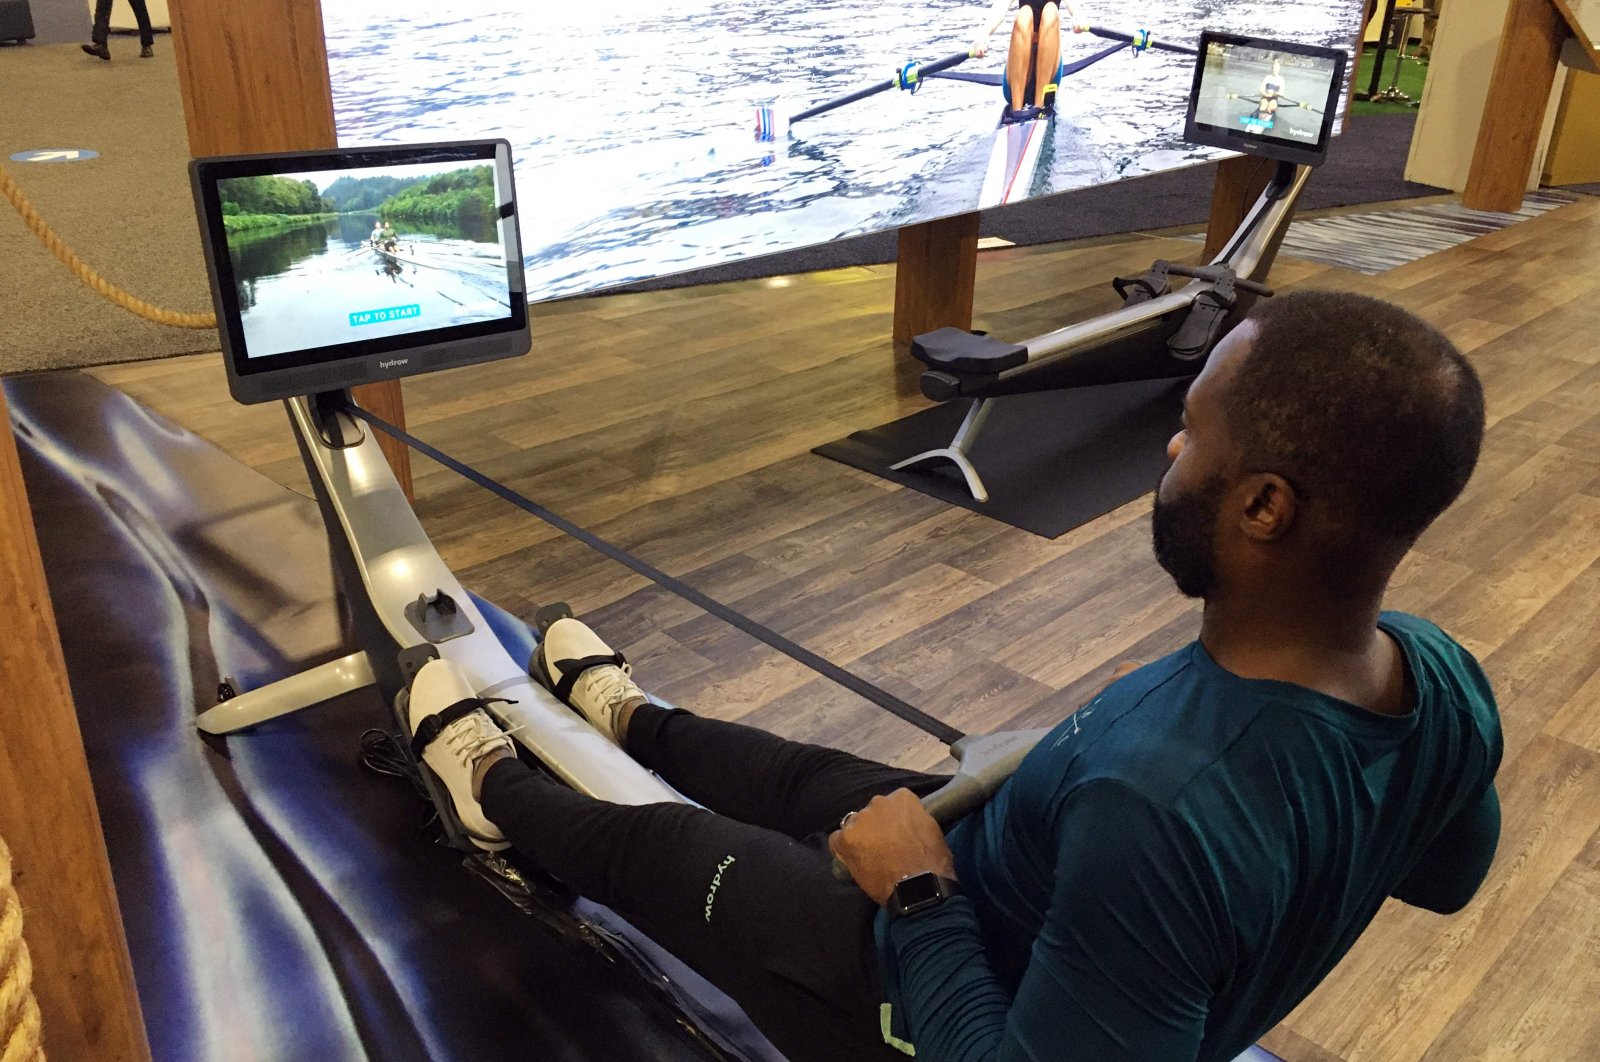 Aquil Abdullah, an employee of the Hydrow rowing fitness company, demonstrates a rowing machine at the CES technology show in Las Vegas, U.S., Jan. 7, 2022. (AFP Photo)